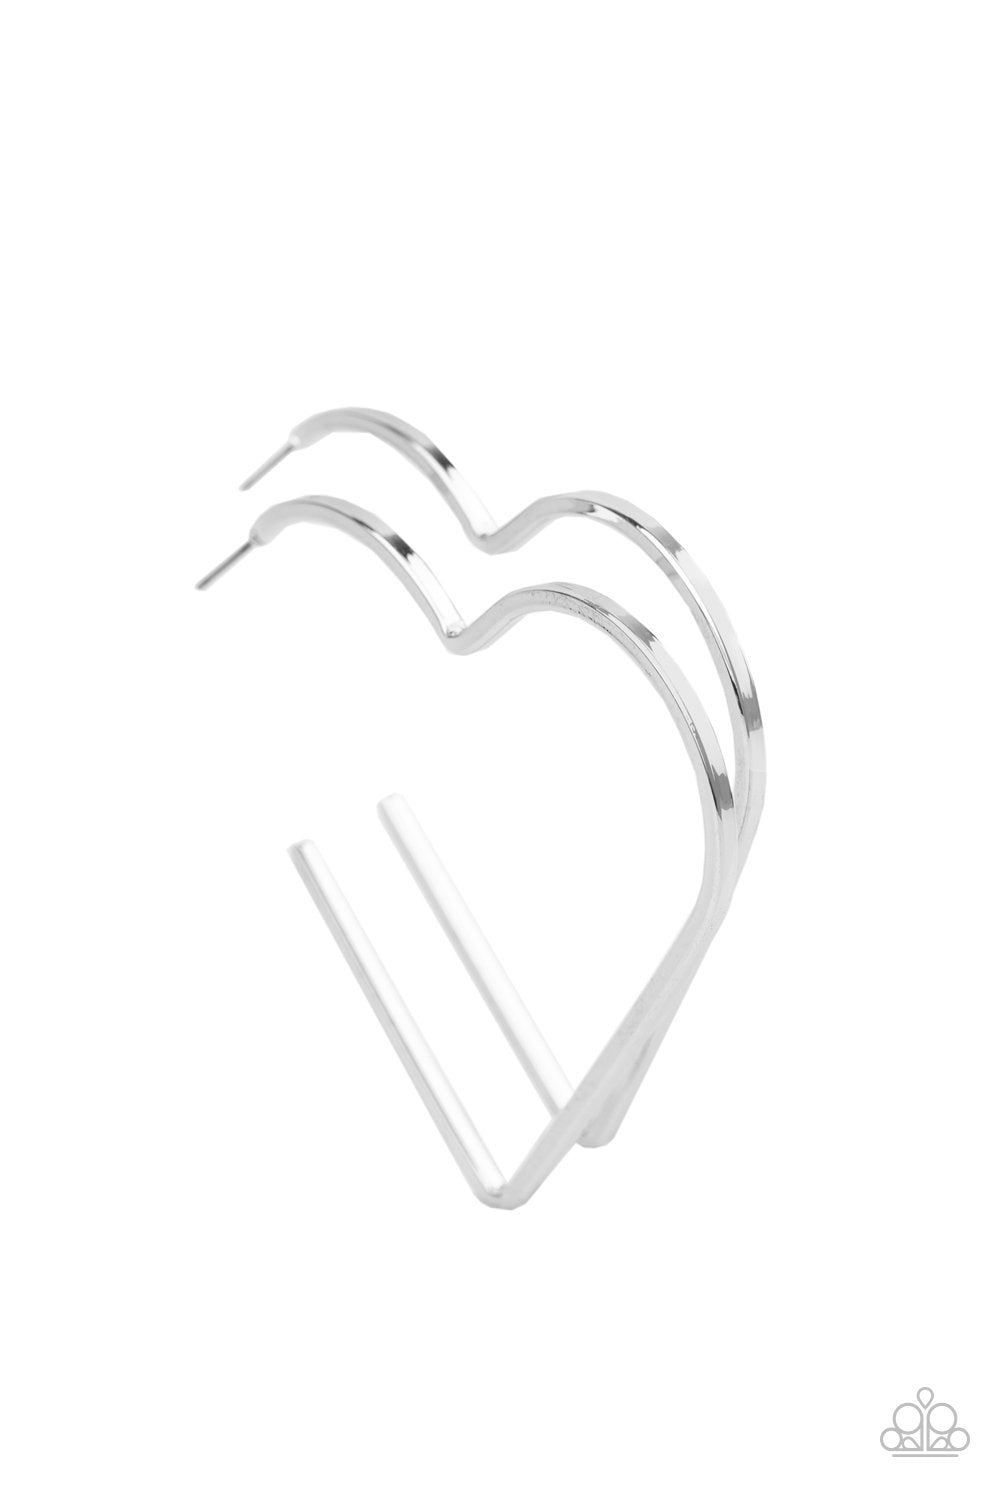 I HEART a Rumor Silver Heart-shaped Hoop Earrings - Paparazzi Accessories - lightbox -CarasShop.com - $5 Jewelry by Cara Jewels